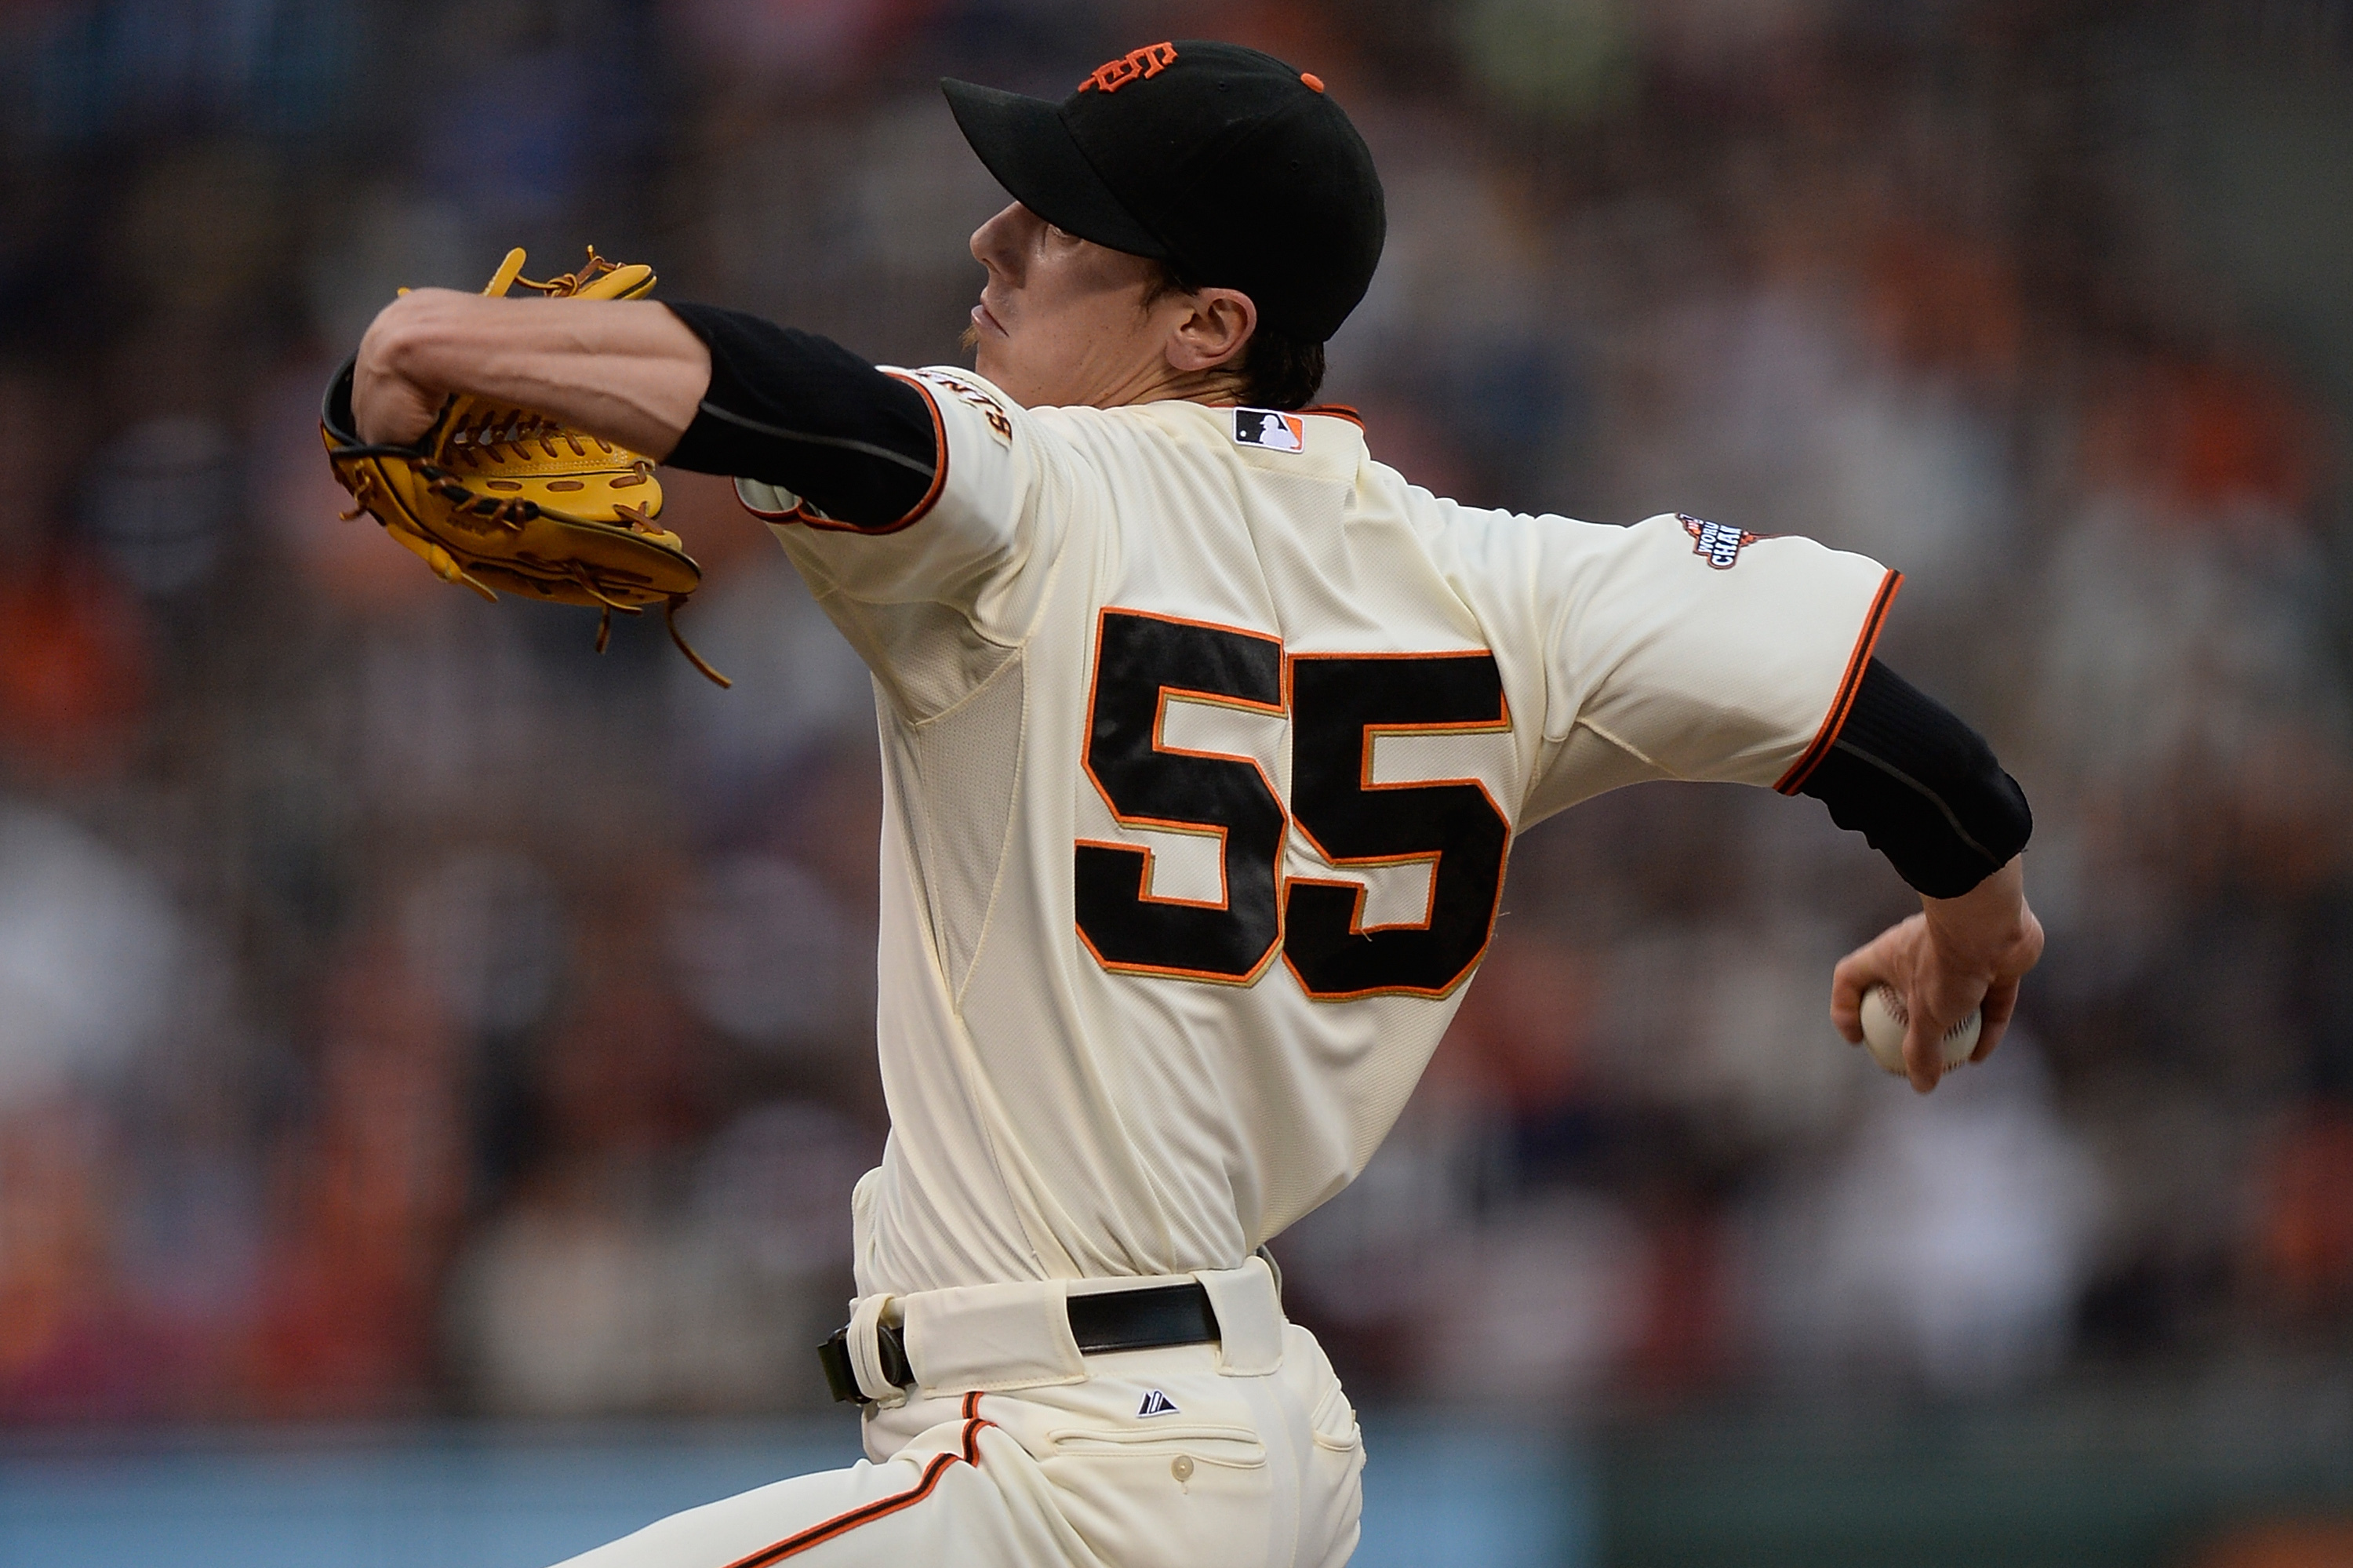 Tim Lincecum tosses no-hitter as Giants beat Padres